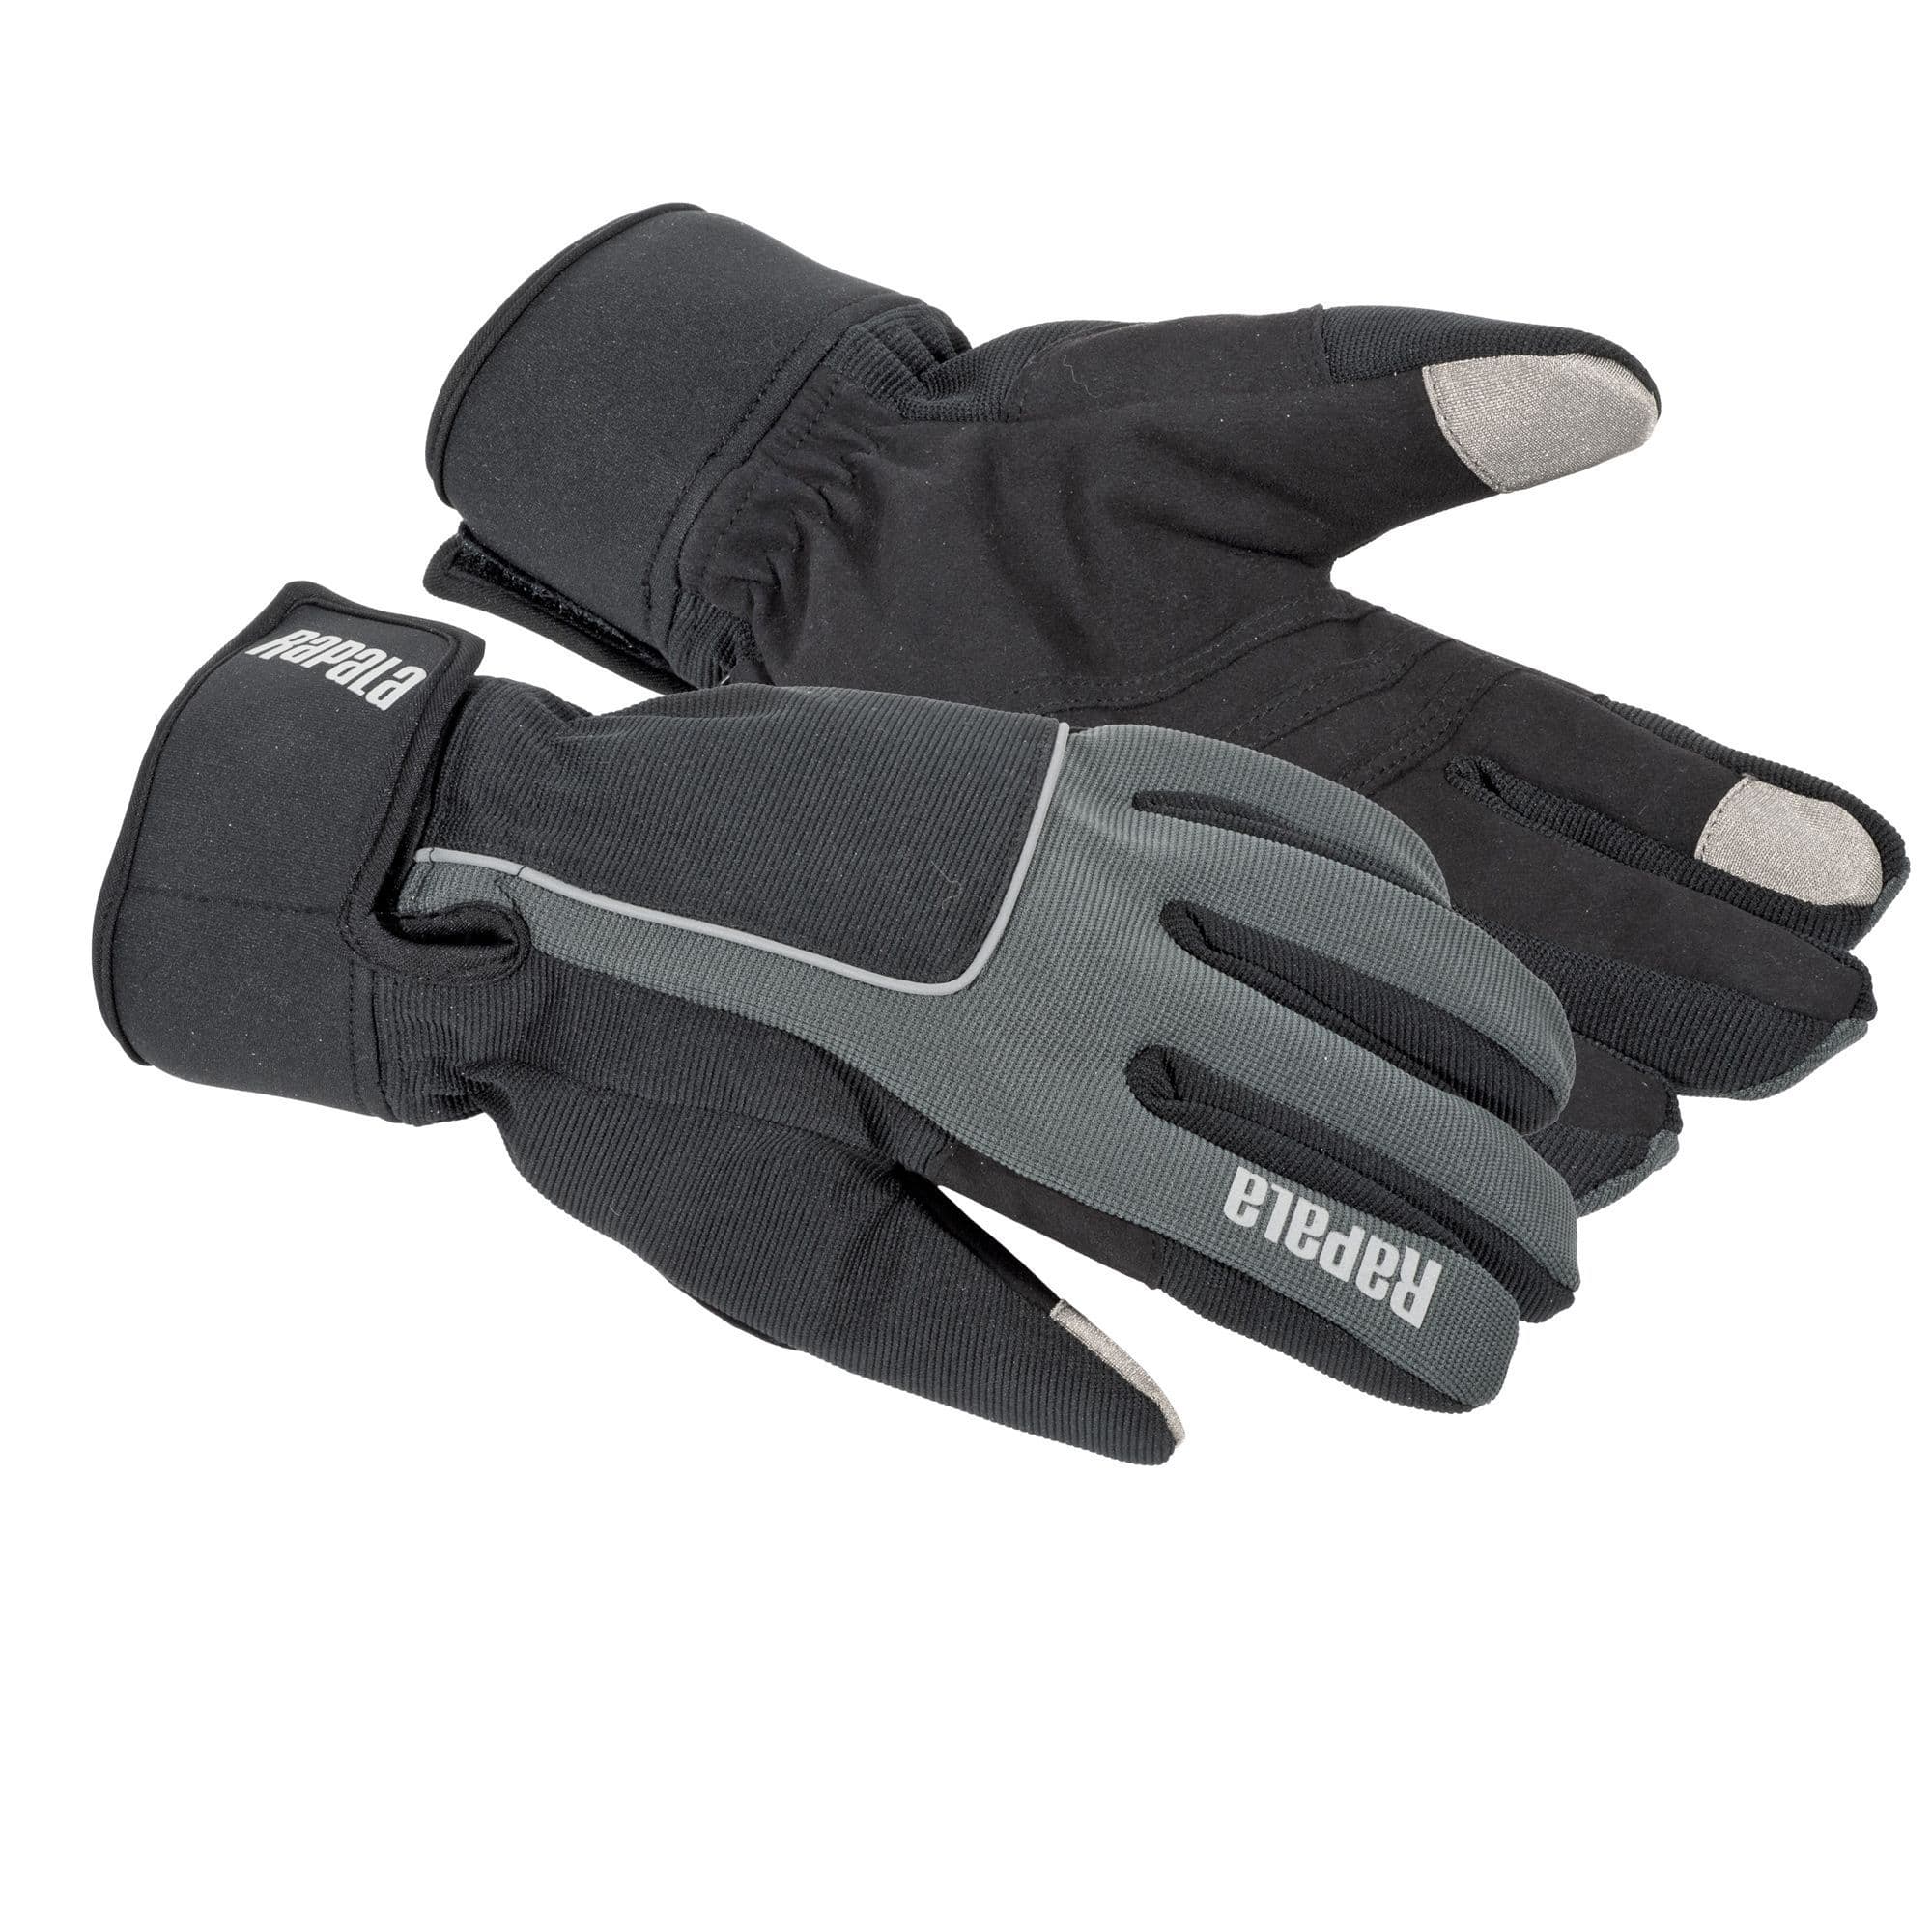 https://media-www.canadiantire.ca/product/playing/fishing/ice-fishing/1781975/rapala-ice-glove-windproof-waterproof-breathable-3m-thin-2bb048d9-cacc-4194-9320-afa7fe7bf35d-jpgrendition.jpg